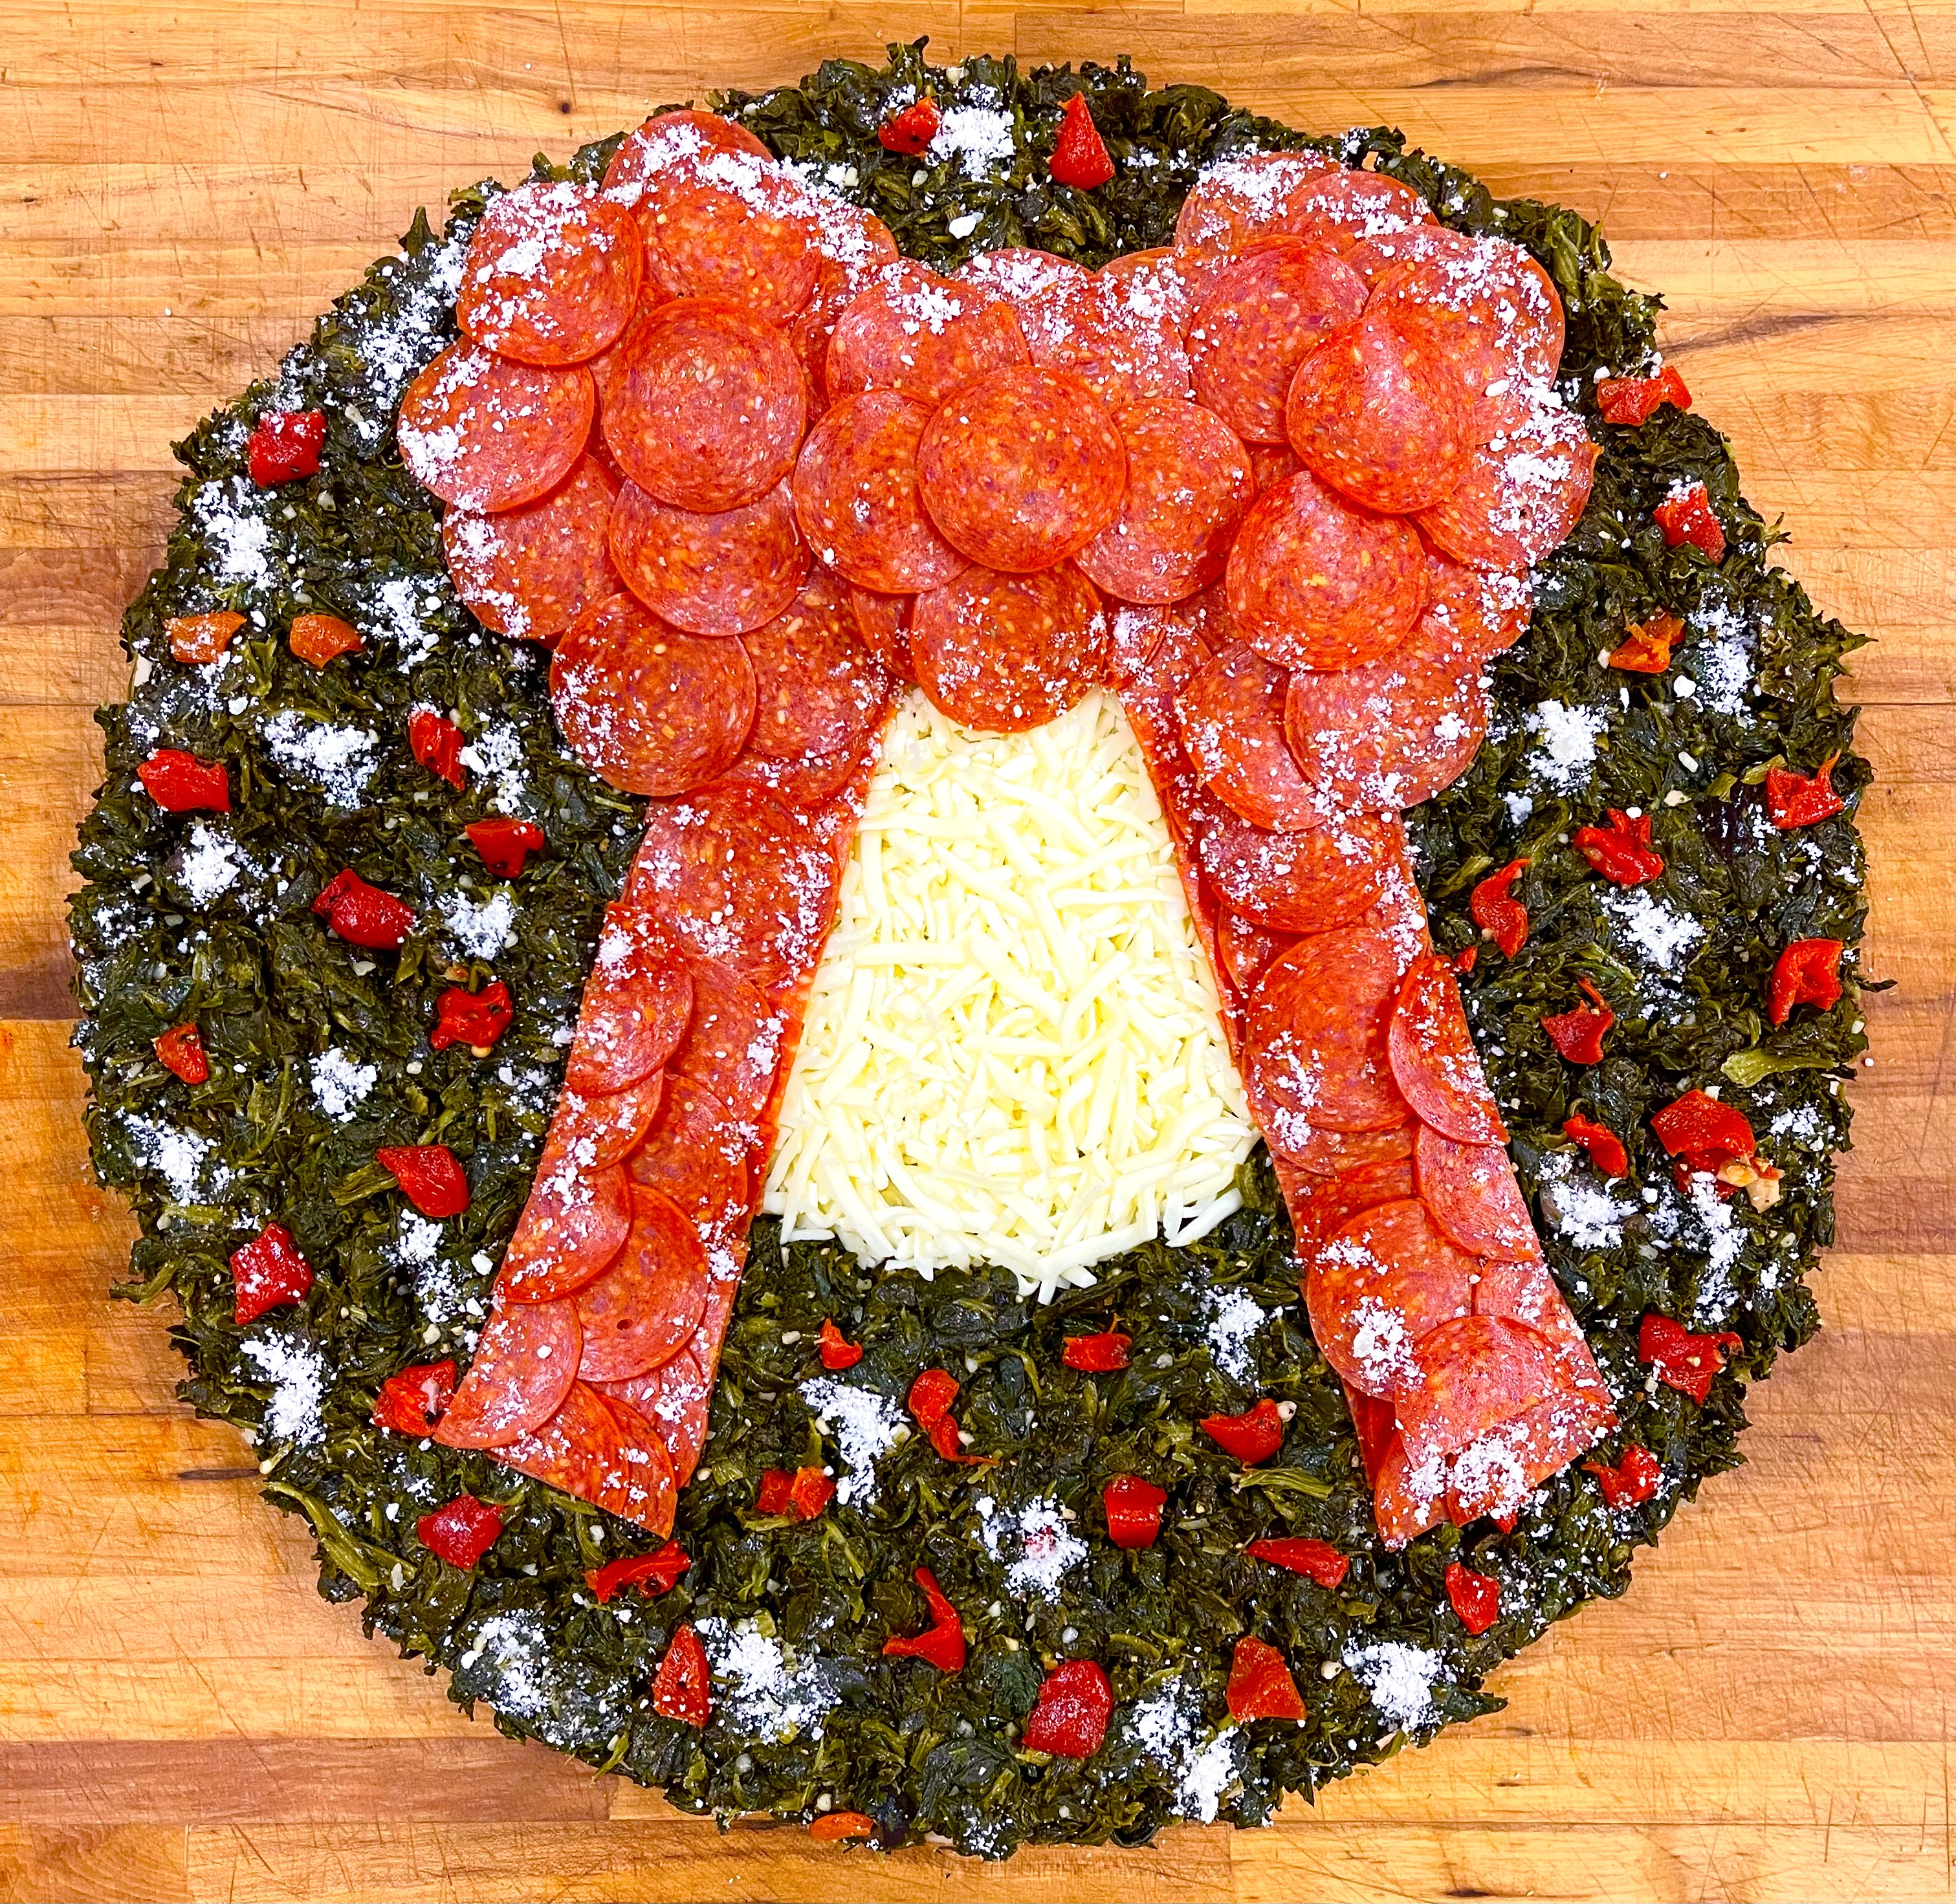 Red Bow Wreath